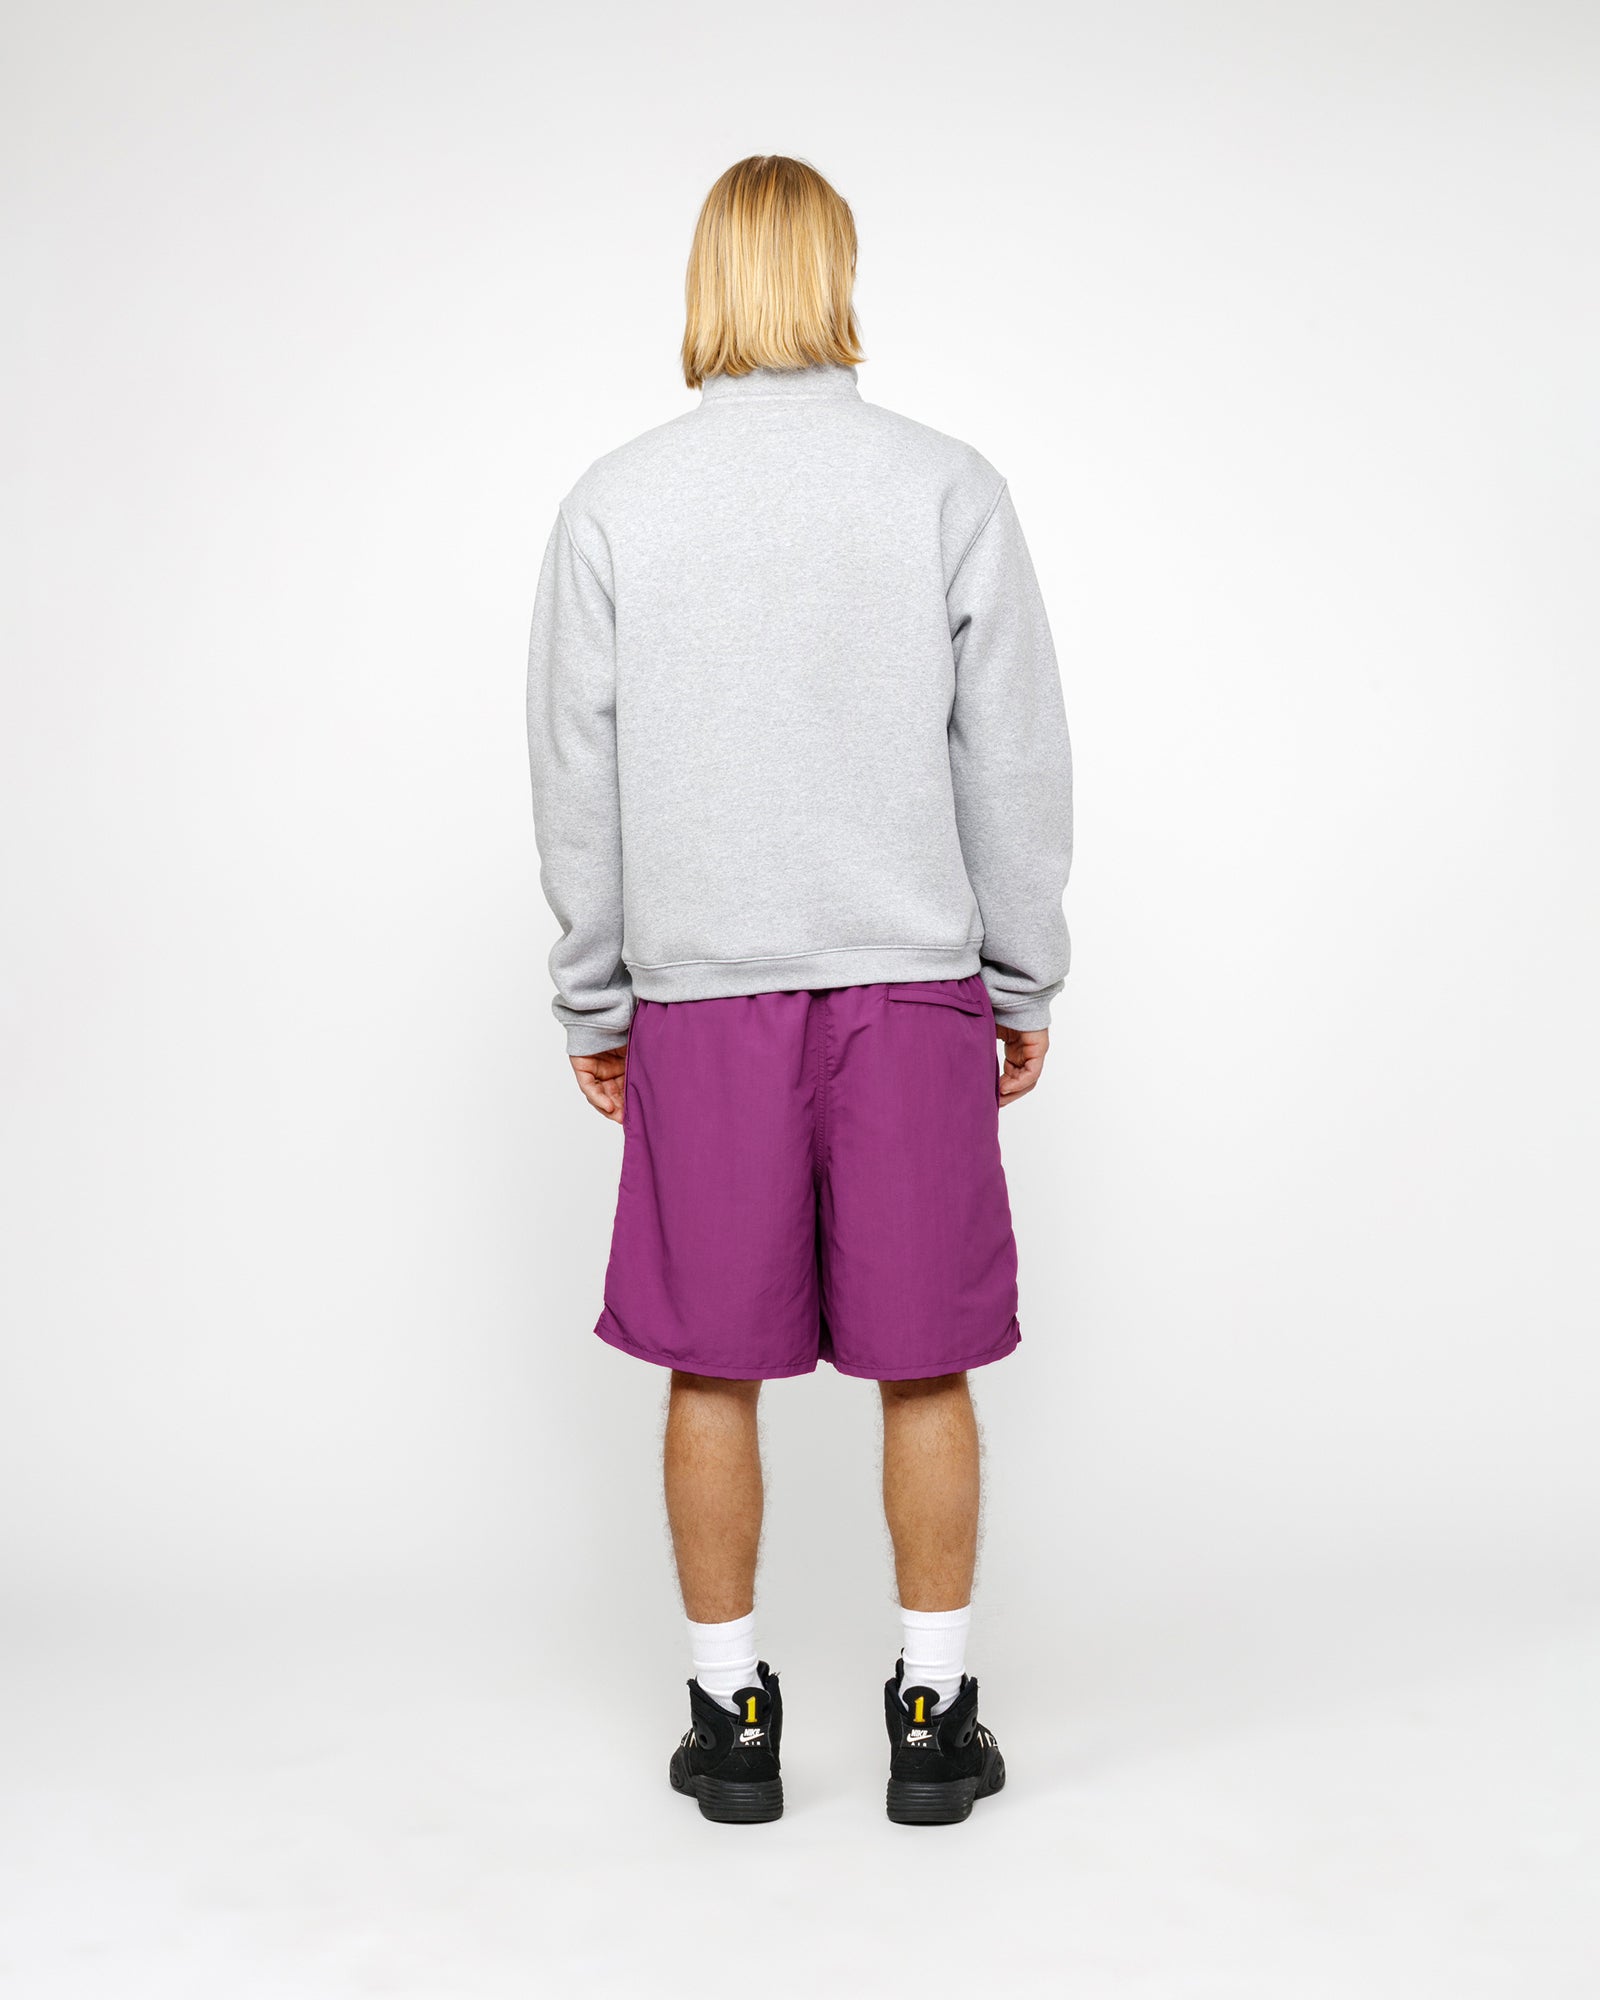 Stüssy Water Short Stock Orchid Bottoms